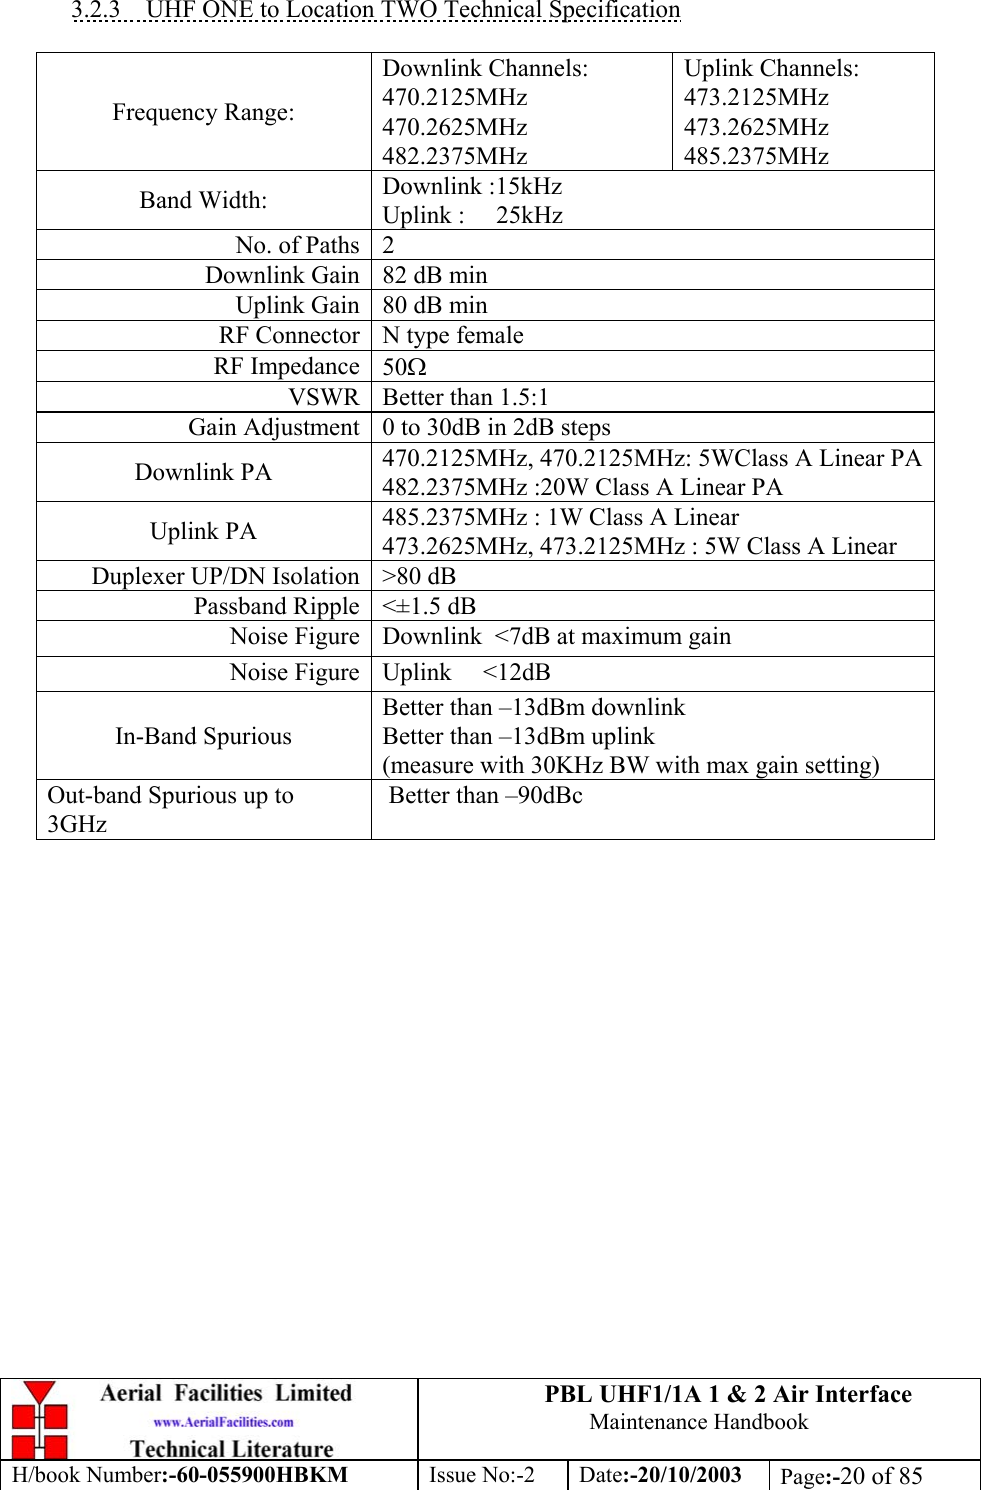 PBL UHF1/1A 1 &amp; 2 Air InterfaceMaintenance HandbookH/book Number:-60-055900HBKM Issue No:-2 Date:-20/10/2003 Page:-20 of 853.2.3    UHF ONE to Location TWO Technical SpecificationFrequency Range:Downlink Channels:470.2125MHz470.2625MHz482.2375MHzUplink Channels:473.2125MHz473.2625MHz485.2375MHzBand Width: Downlink :15kHzUplink :     25kHzNo. of Paths 2Downlink Gain 82 dB minUplink Gain 80 dB minRF Connector N type femaleRF Impedance 50ΩVSWR Better than 1.5:1Gain Adjustment 0 to 30dB in 2dB stepsDownlink PA 470.2125MHz, 470.2125MHz: 5WClass A Linear PA482.2375MHz :20W Class A Linear PAUplink PA 485.2375MHz : 1W Class A Linear473.2625MHz, 473.2125MHz : 5W Class A LinearDuplexer UP/DN Isolation &gt;80 dBPassband Ripple &lt;±1.5 dBNoise Figure Downlink  &lt;7dB at maximum gainNoise Figure Uplink     &lt;12dBIn-Band SpuriousBetter than –13dBm downlinkBetter than –13dBm uplink(measure with 30KHz BW with max gain setting)Out-band Spurious up to3GHz Better than –90dBc